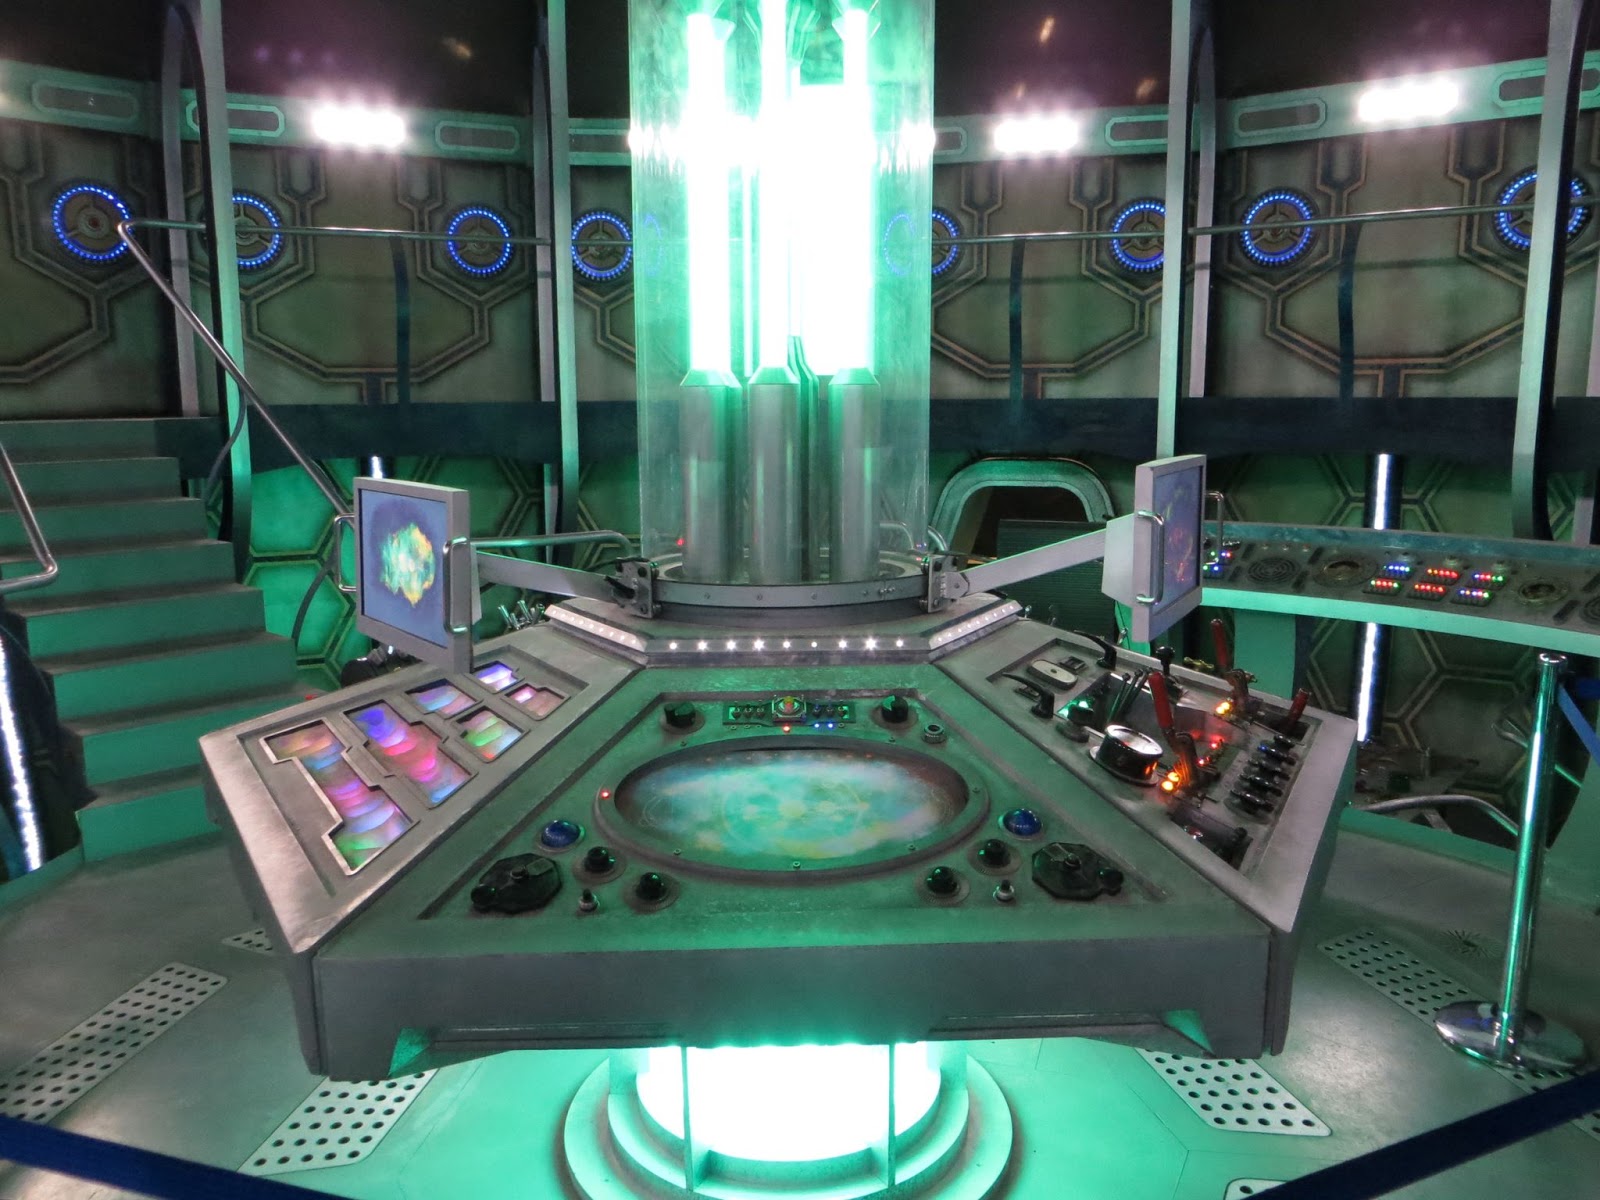 Blogtor Who: REVIEW: Doctor Who Studio Tours